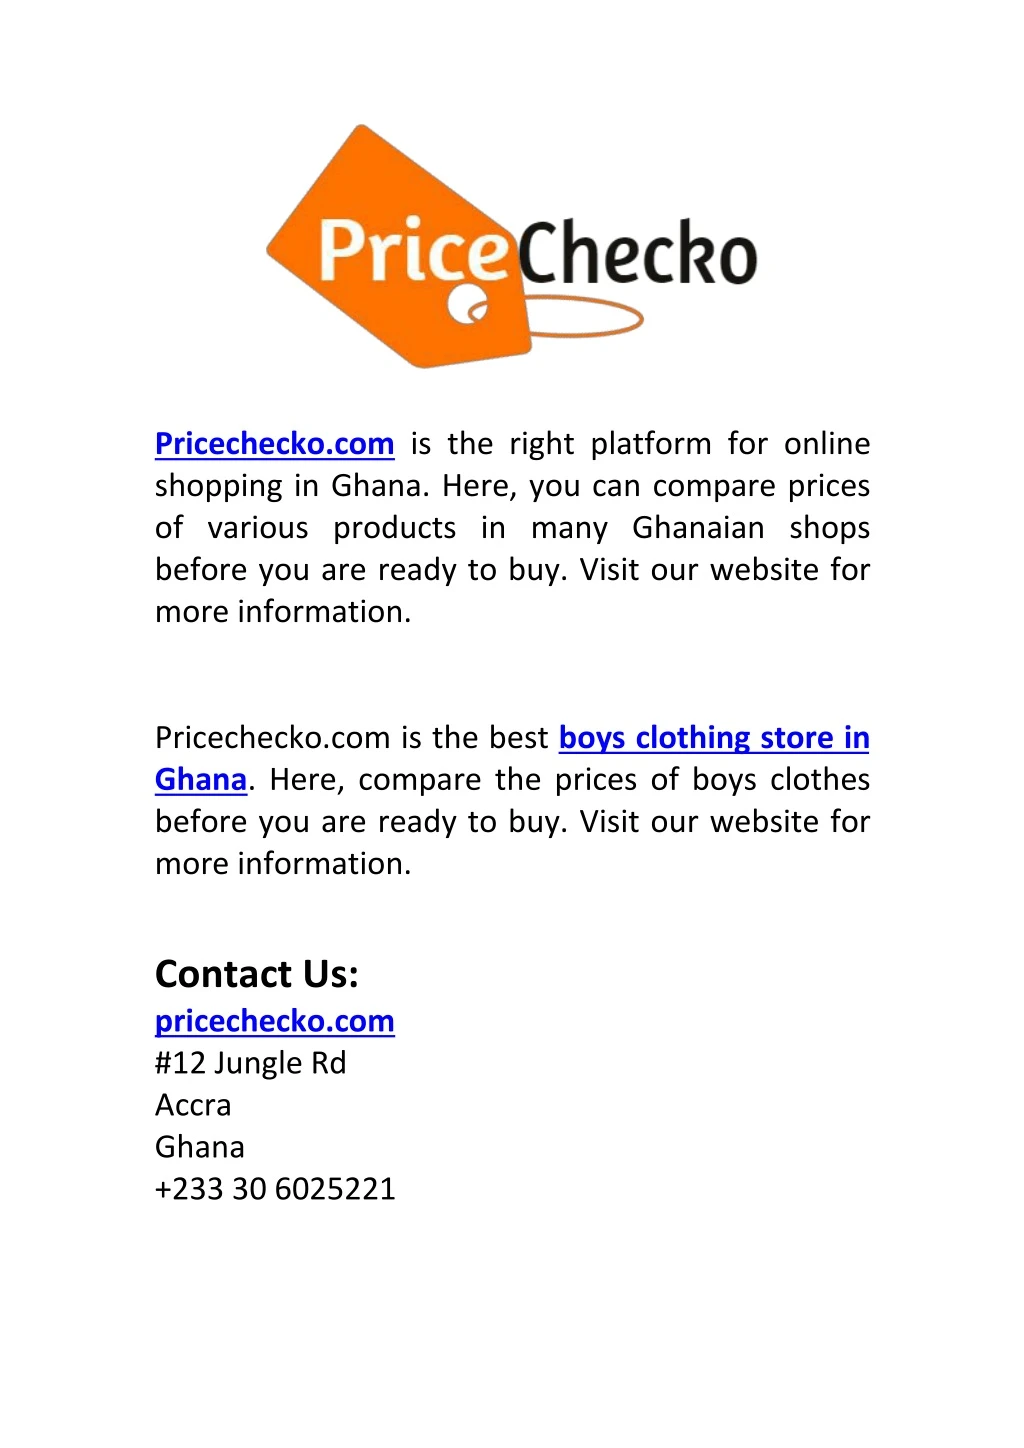 pricechecko com is the right platform for online